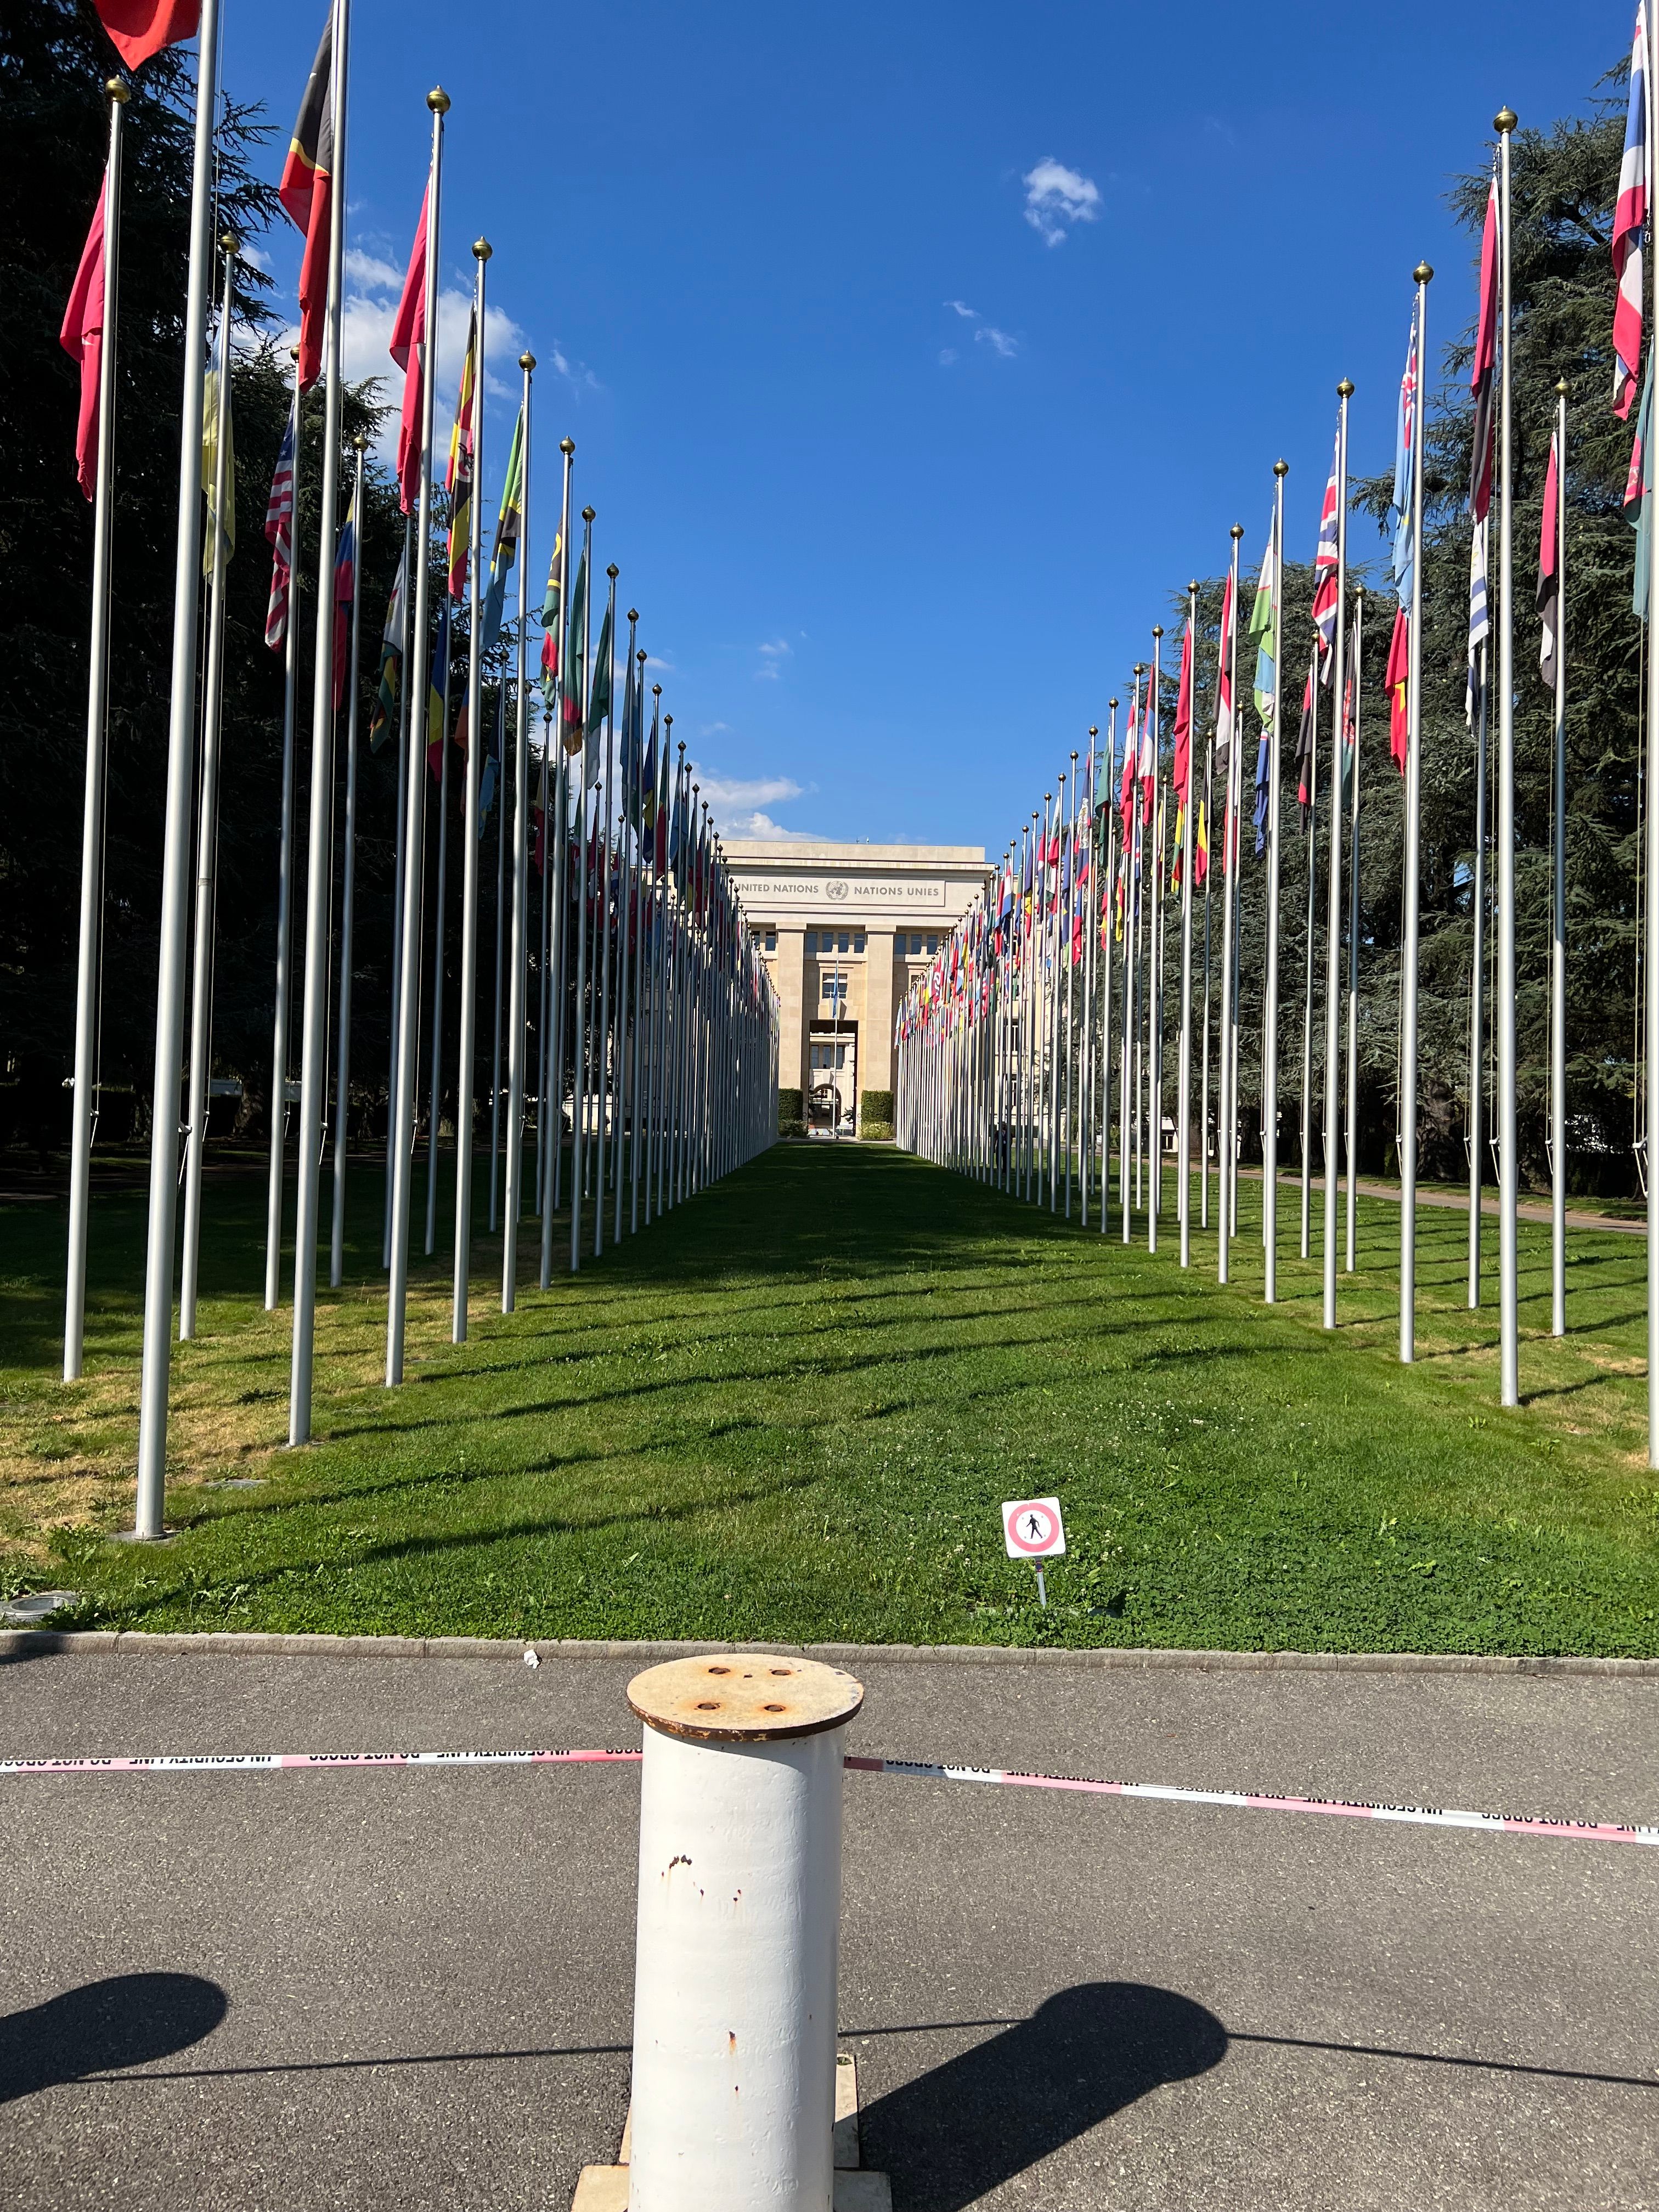 A photo of two rows of flags on poles on a lawn